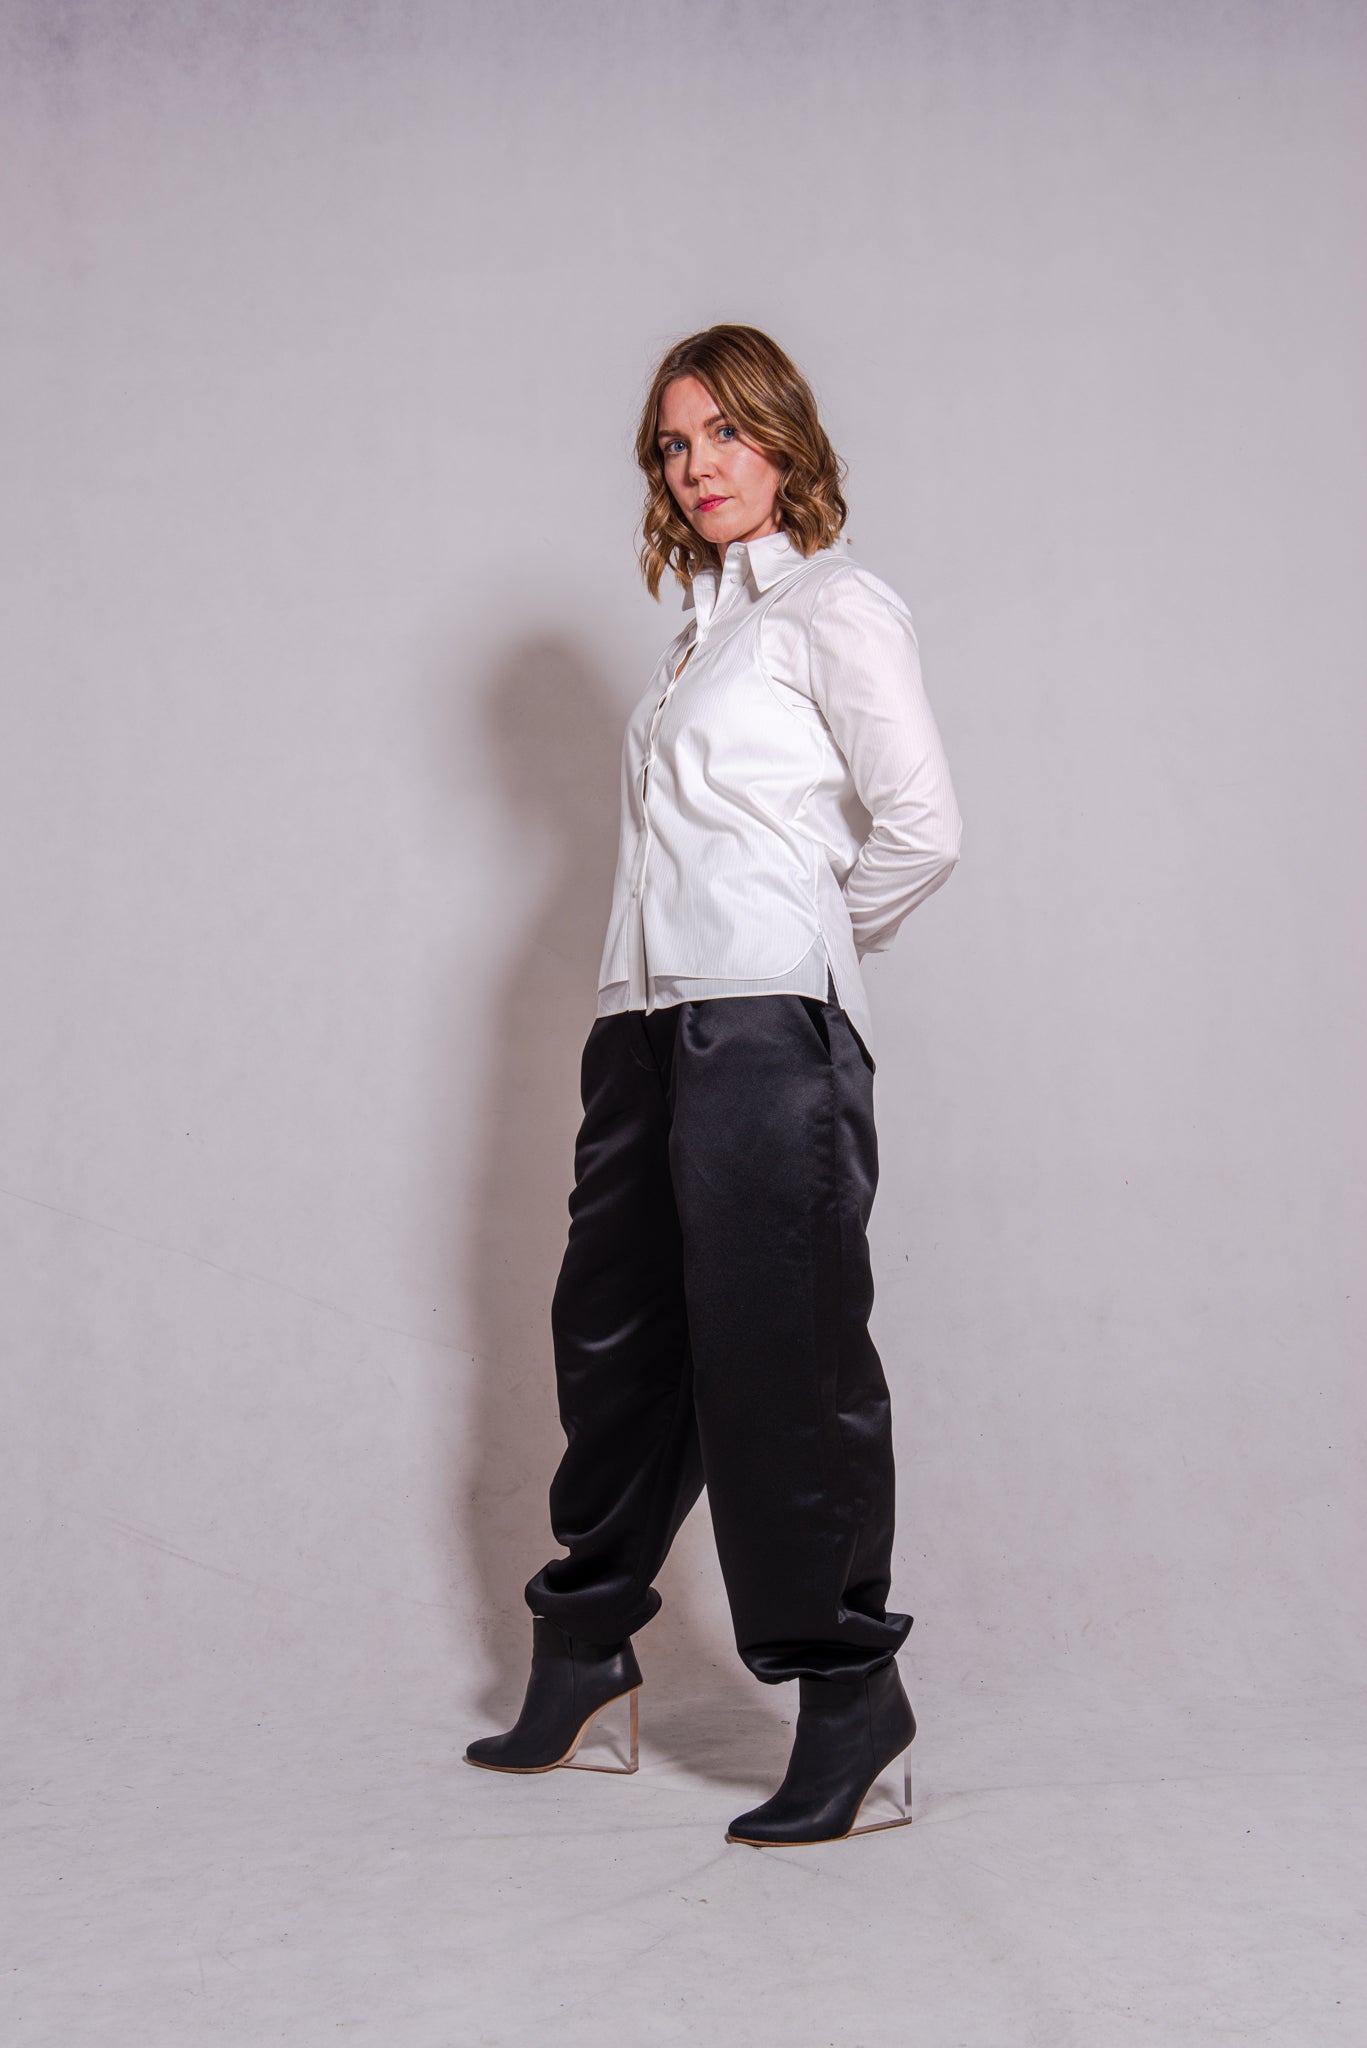 Women wearing Abbey shirt white paired with Agnes trousers (black) against a grey wall.